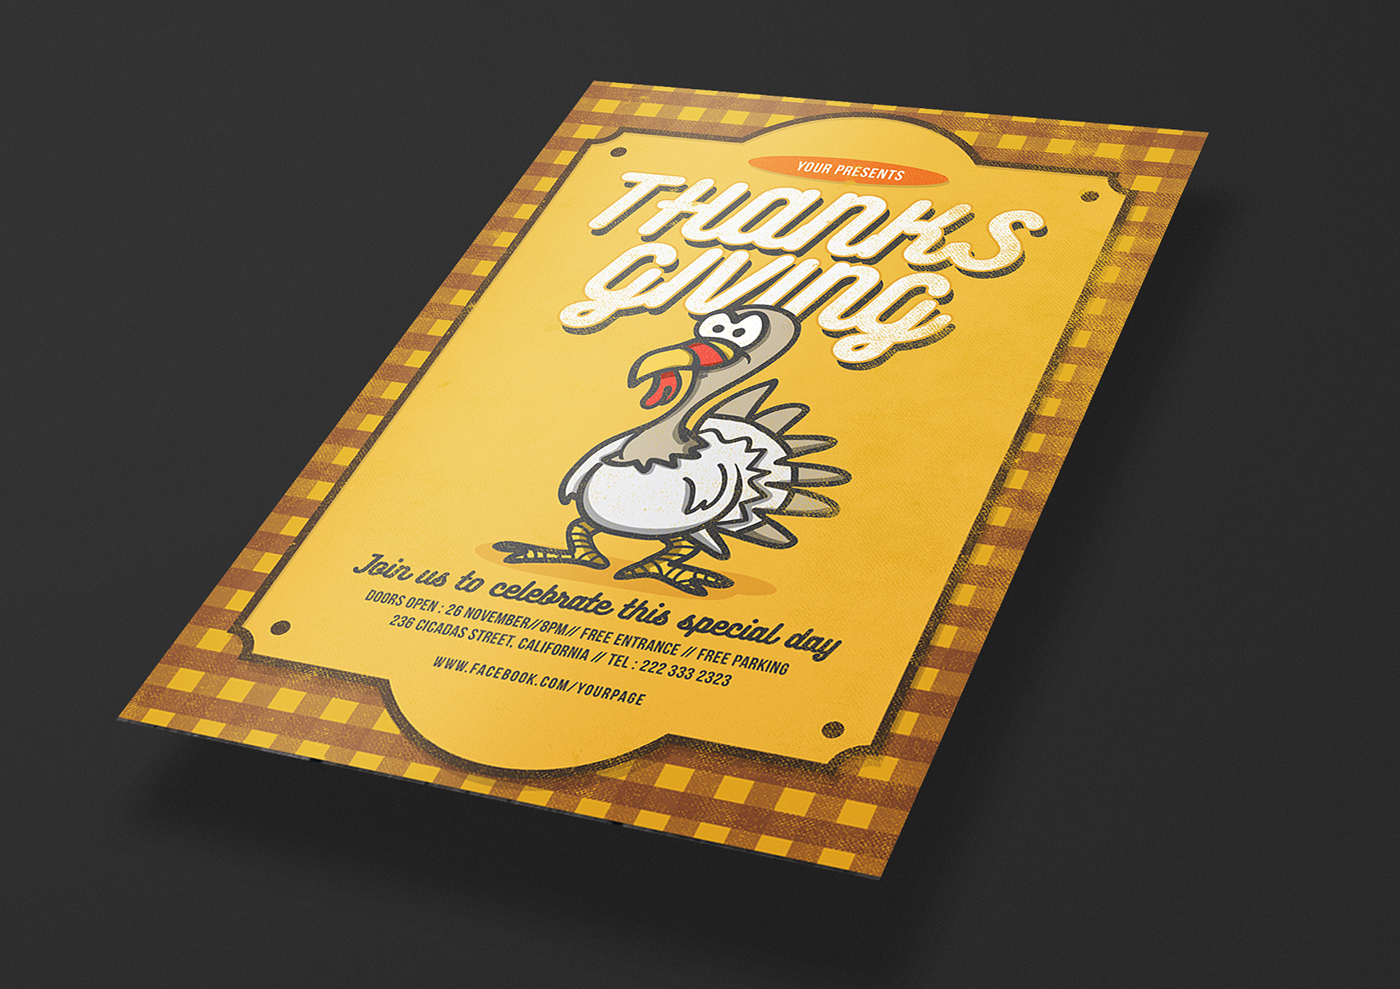 THANKSGIVING FLYER POSTER TURKEY ART BACKGROUND BRIGHT CHAMPAGNE CHICKEN CLEAN CLUB COLOR DRINKS EAT EFFECTS EVENT FALL FESTIVAL HOT LEAF LEAVES LIGHTS NICE NOVEMBER PARTY PSD SEASON SEXY TEMPLATE